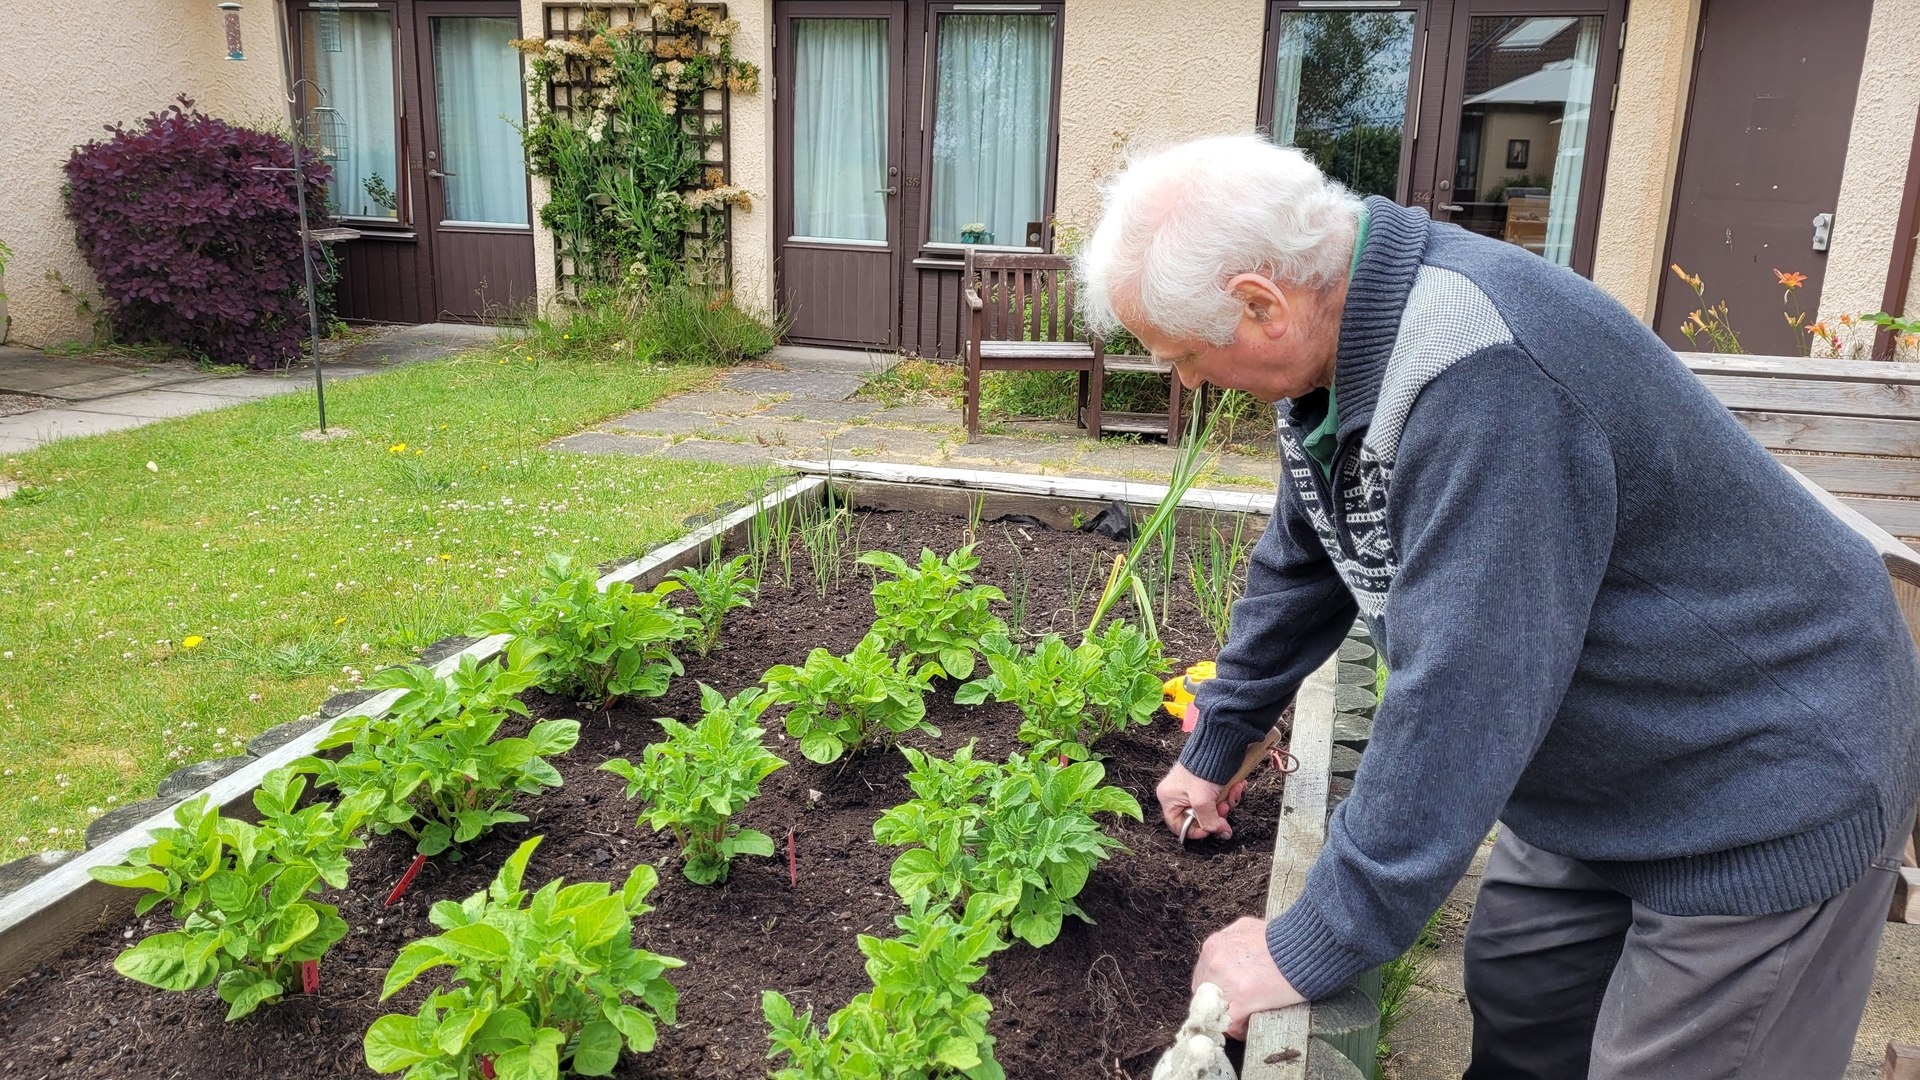 Granda tends to his vegetable patch at the care home.